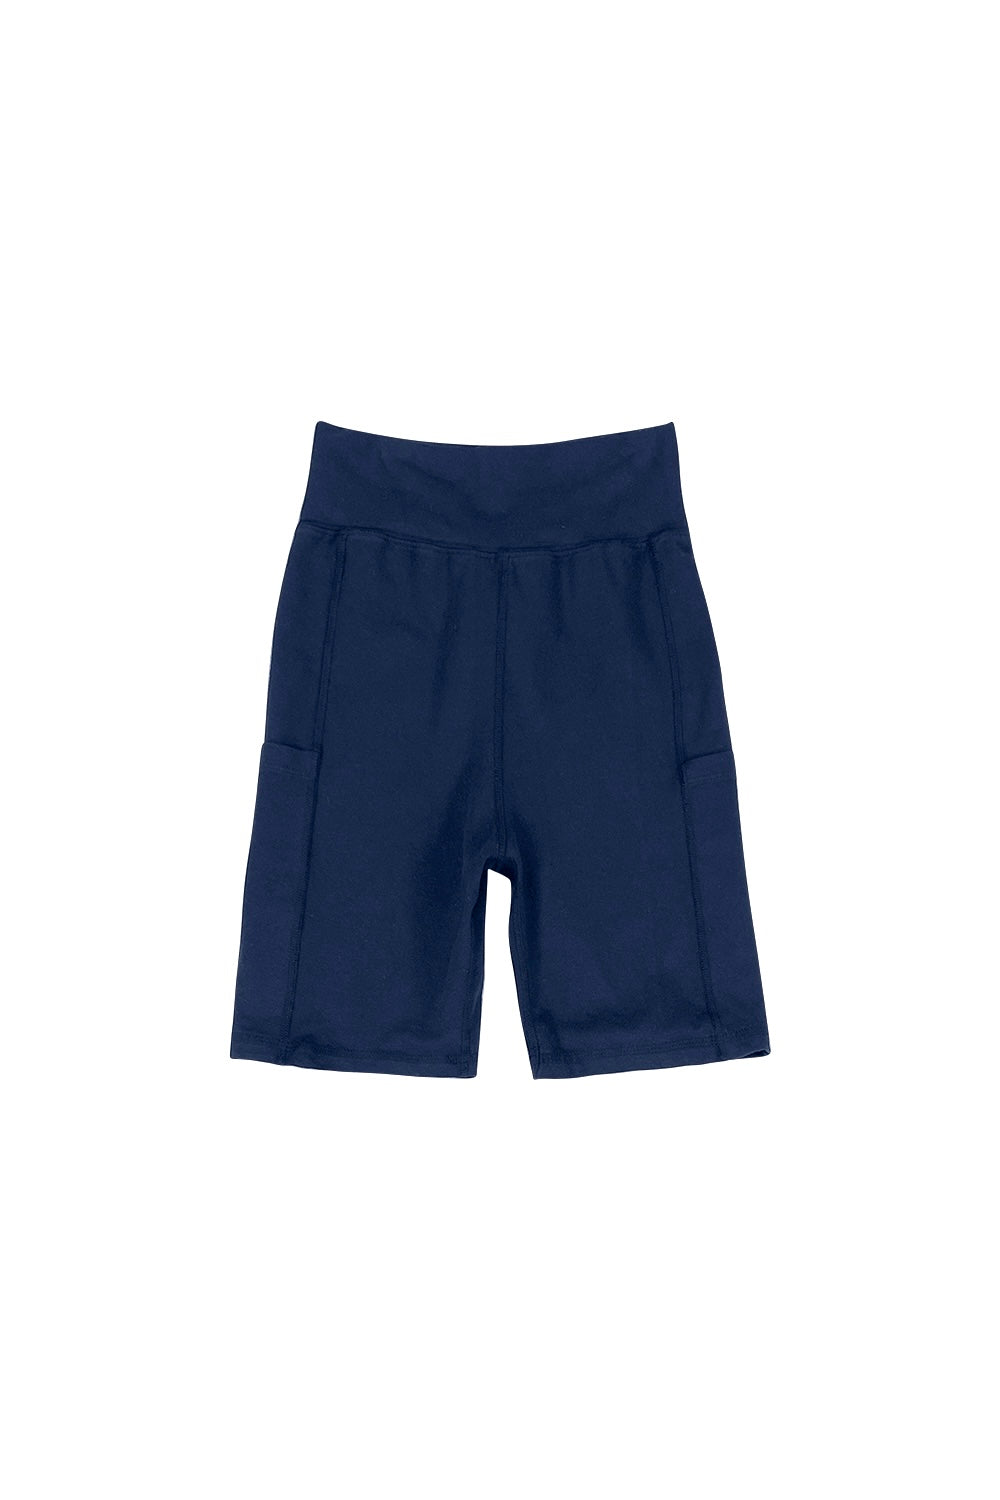 Bike Short with Pockets | Jungmaven Hemp Clothing & Accessories / Color: Navy